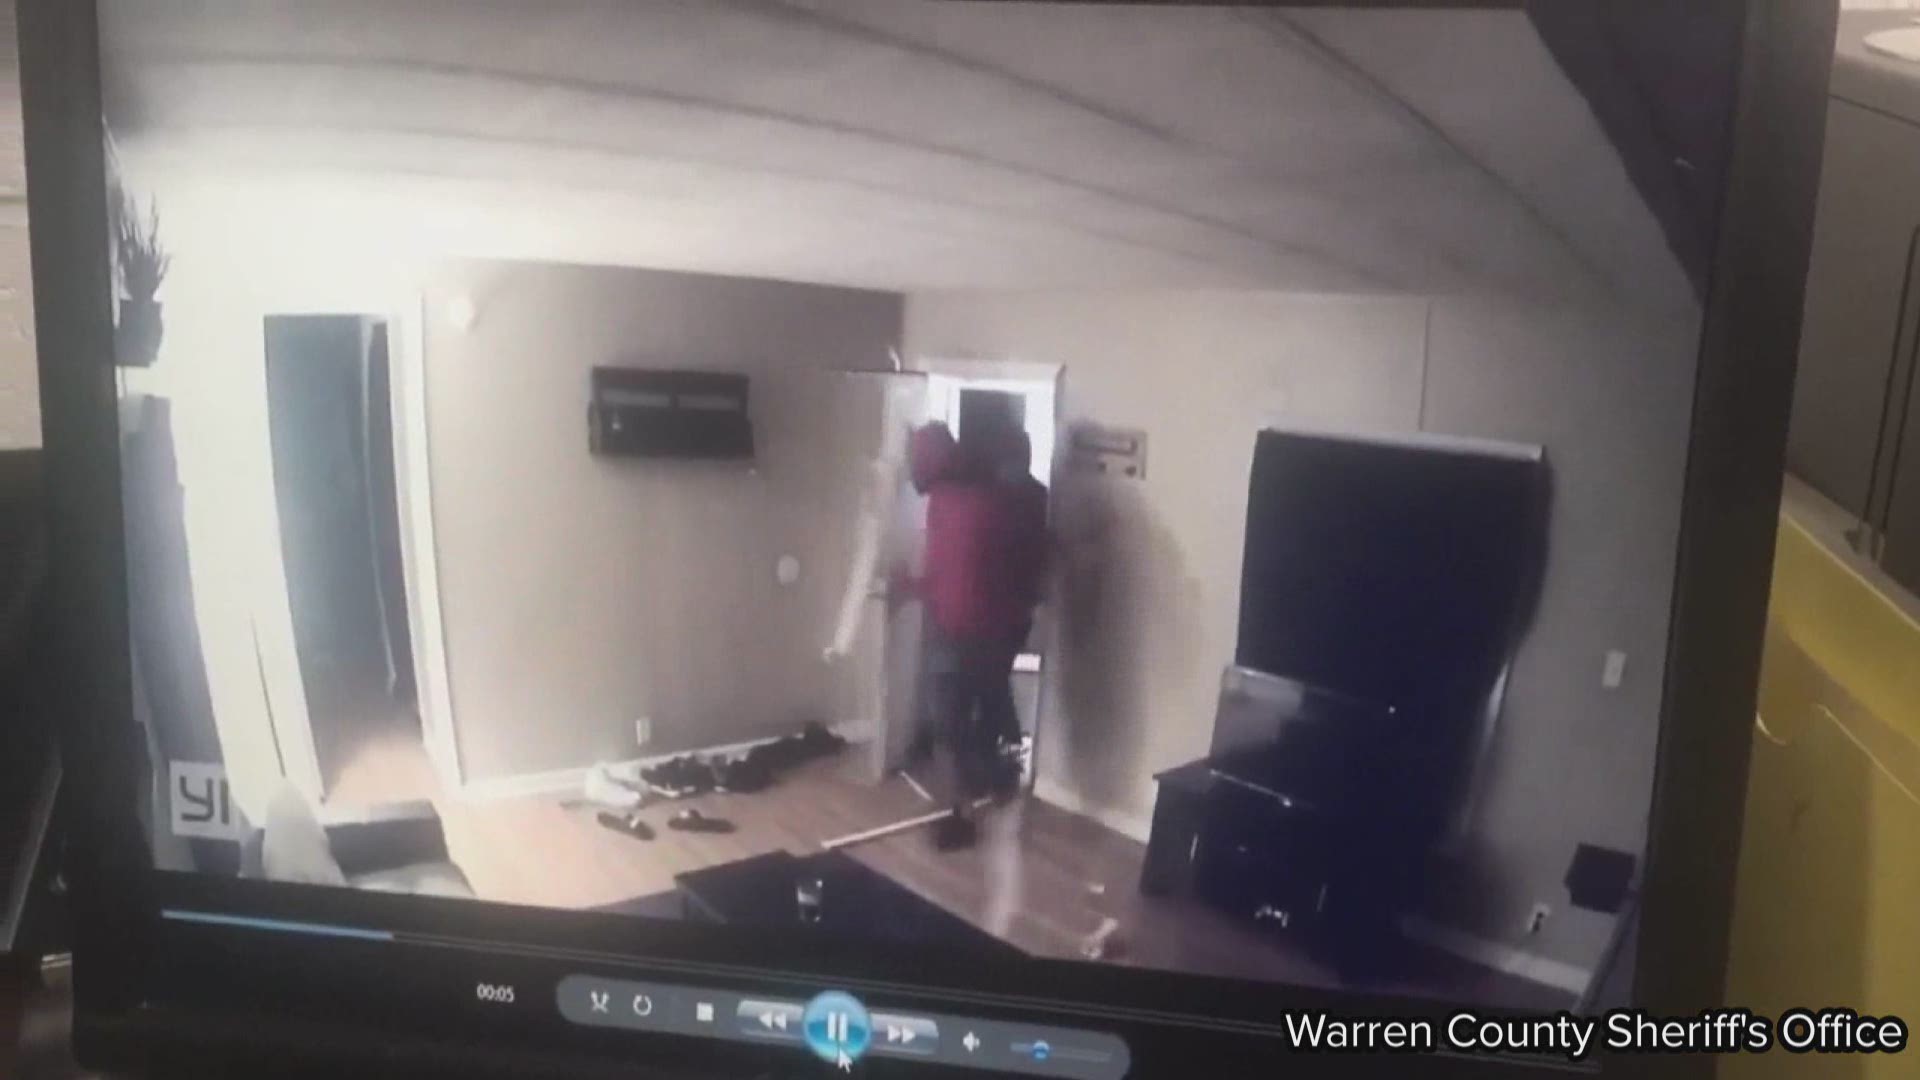 Four armed intruders picked the wrong house in Bowling Green.

Video from the Warren County Sheriff's Office shows four men breaking through the front door and walking into the home. They only make it to the front hallway before the homeowner shoots at them.

All four men jump and run back out the door.

The sheriff's office shared the video in hopes it will help catch the intruders. Sheriff Brett Hightower said the homeowner hurt his hand during the incident.

If deputies find them, the suspects could face attempted murder and burglary charges.